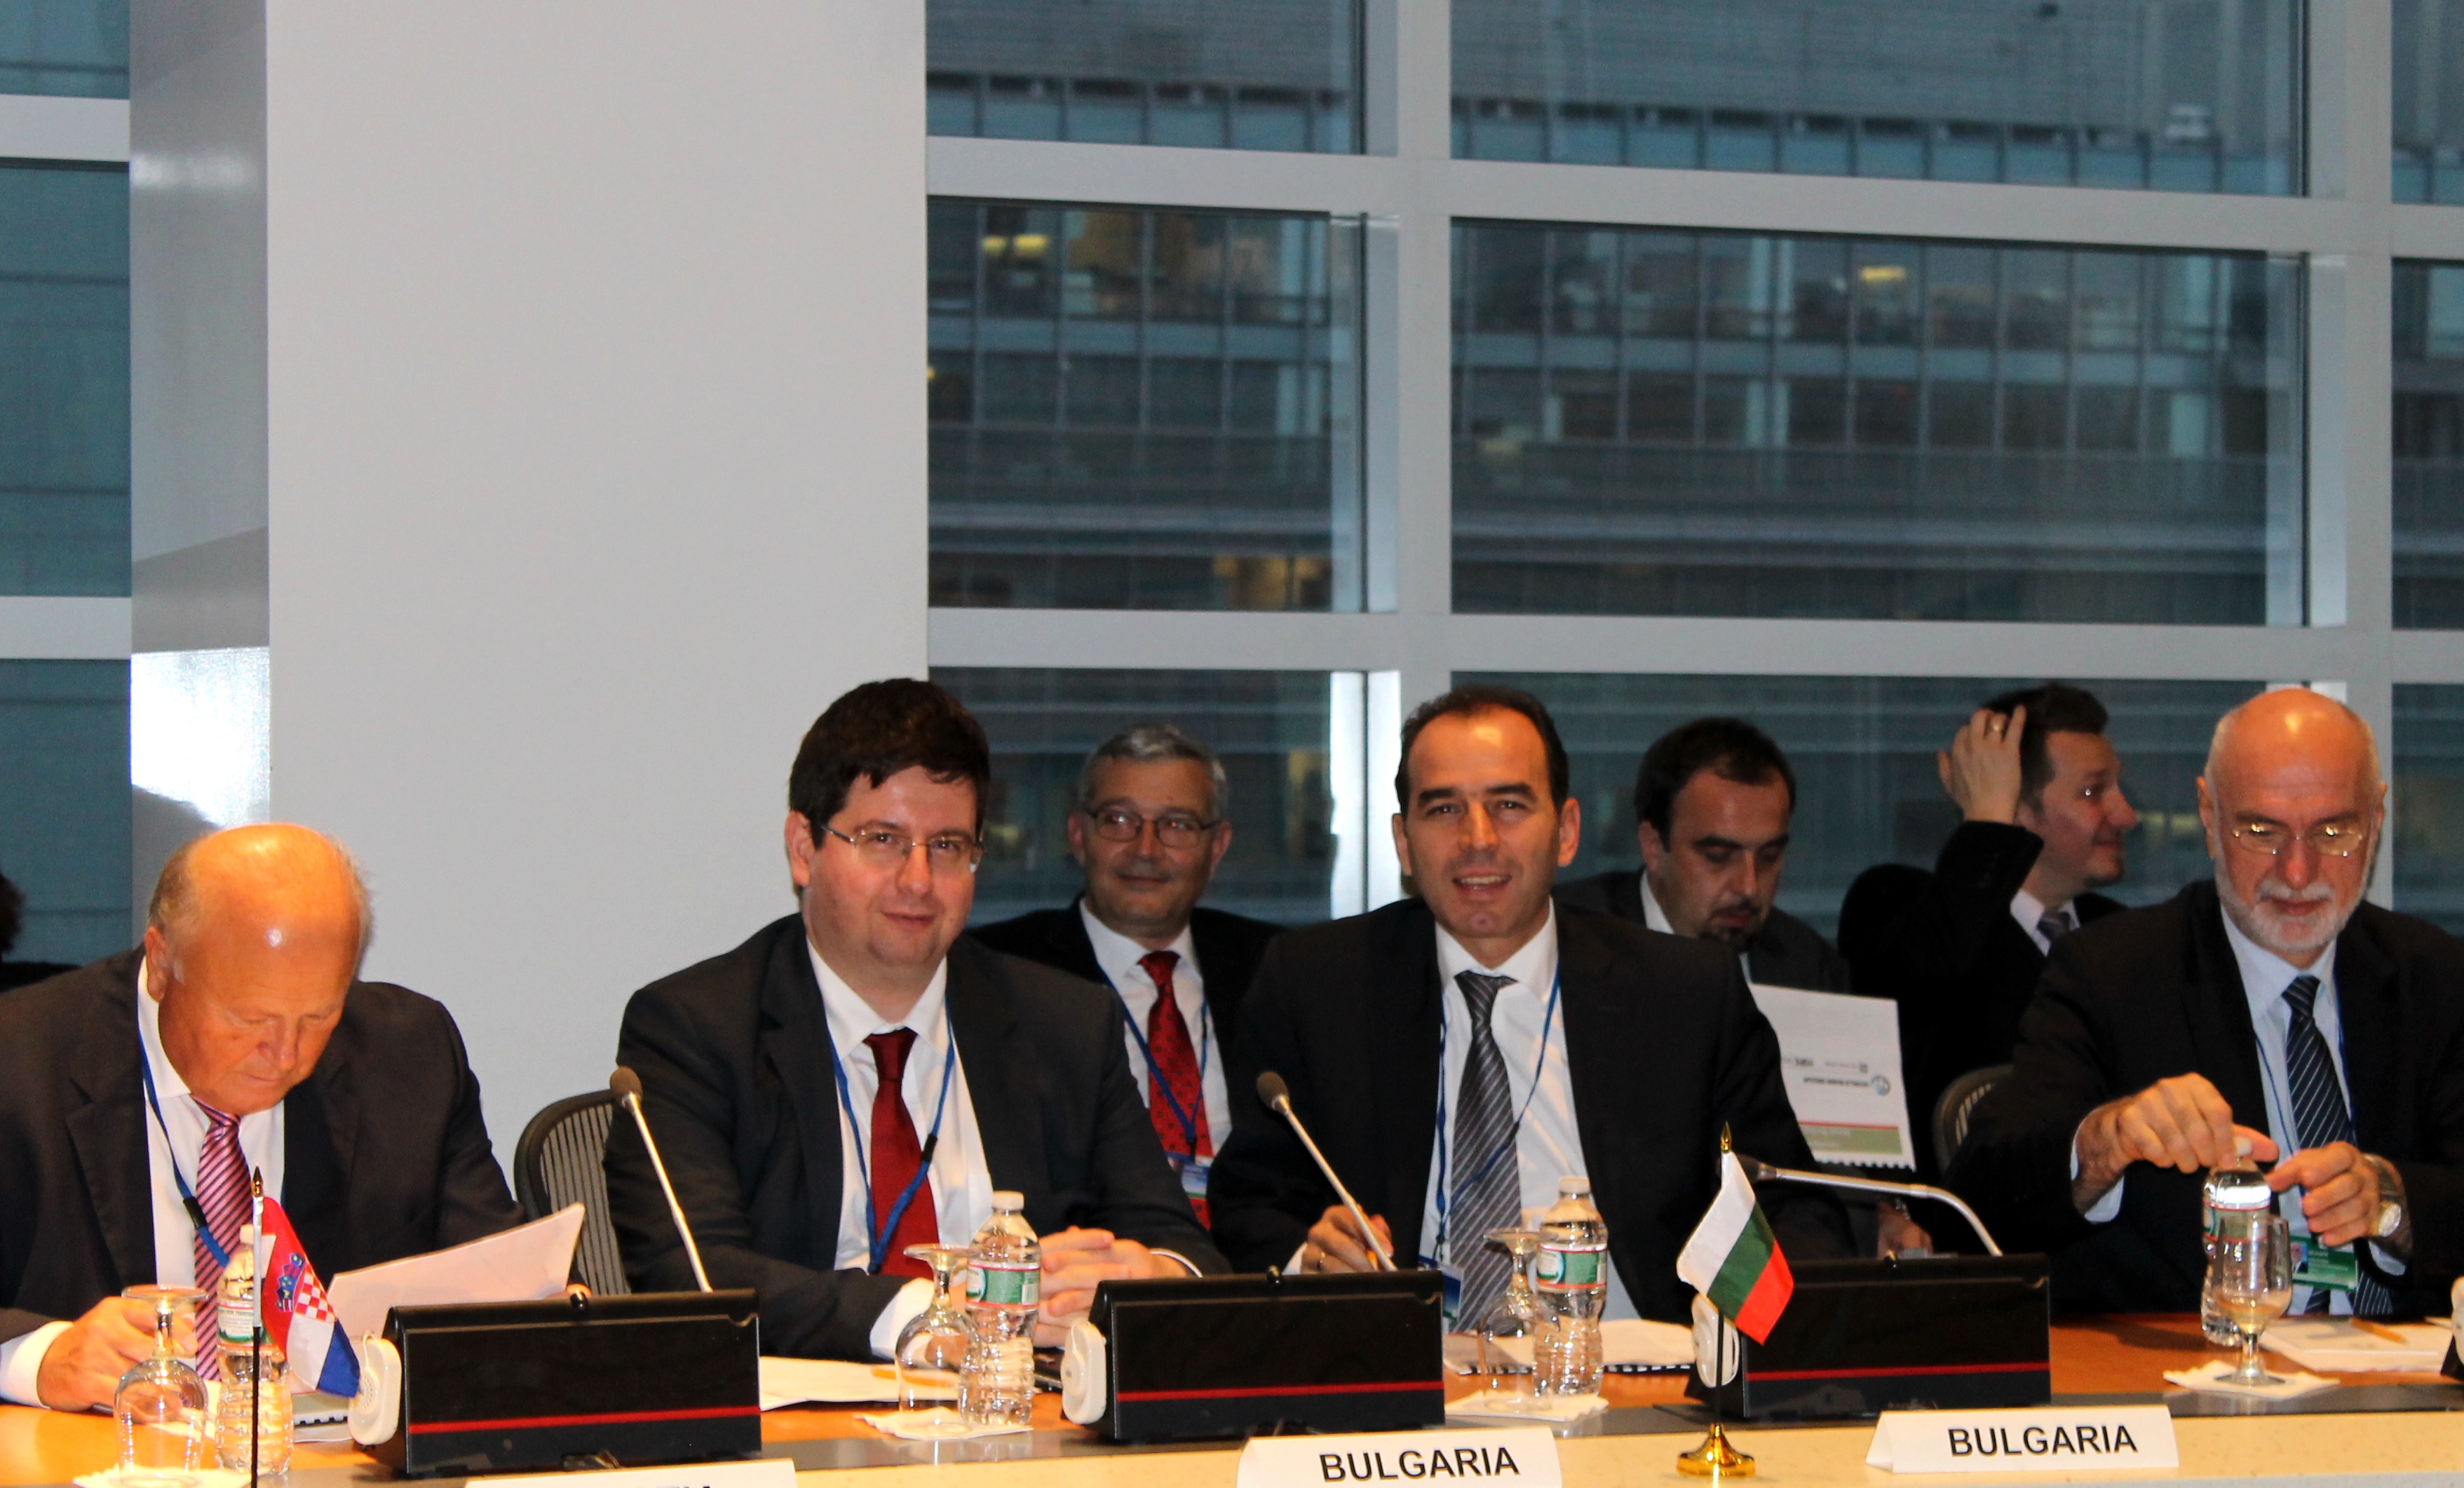 MINISTER OF FINANCE PETAR CHOBANOV TOOK PART IN THE WORLD BANK GROUP AND INTERNATIONAL MONETARY FUND ANNUAL MEETINGS